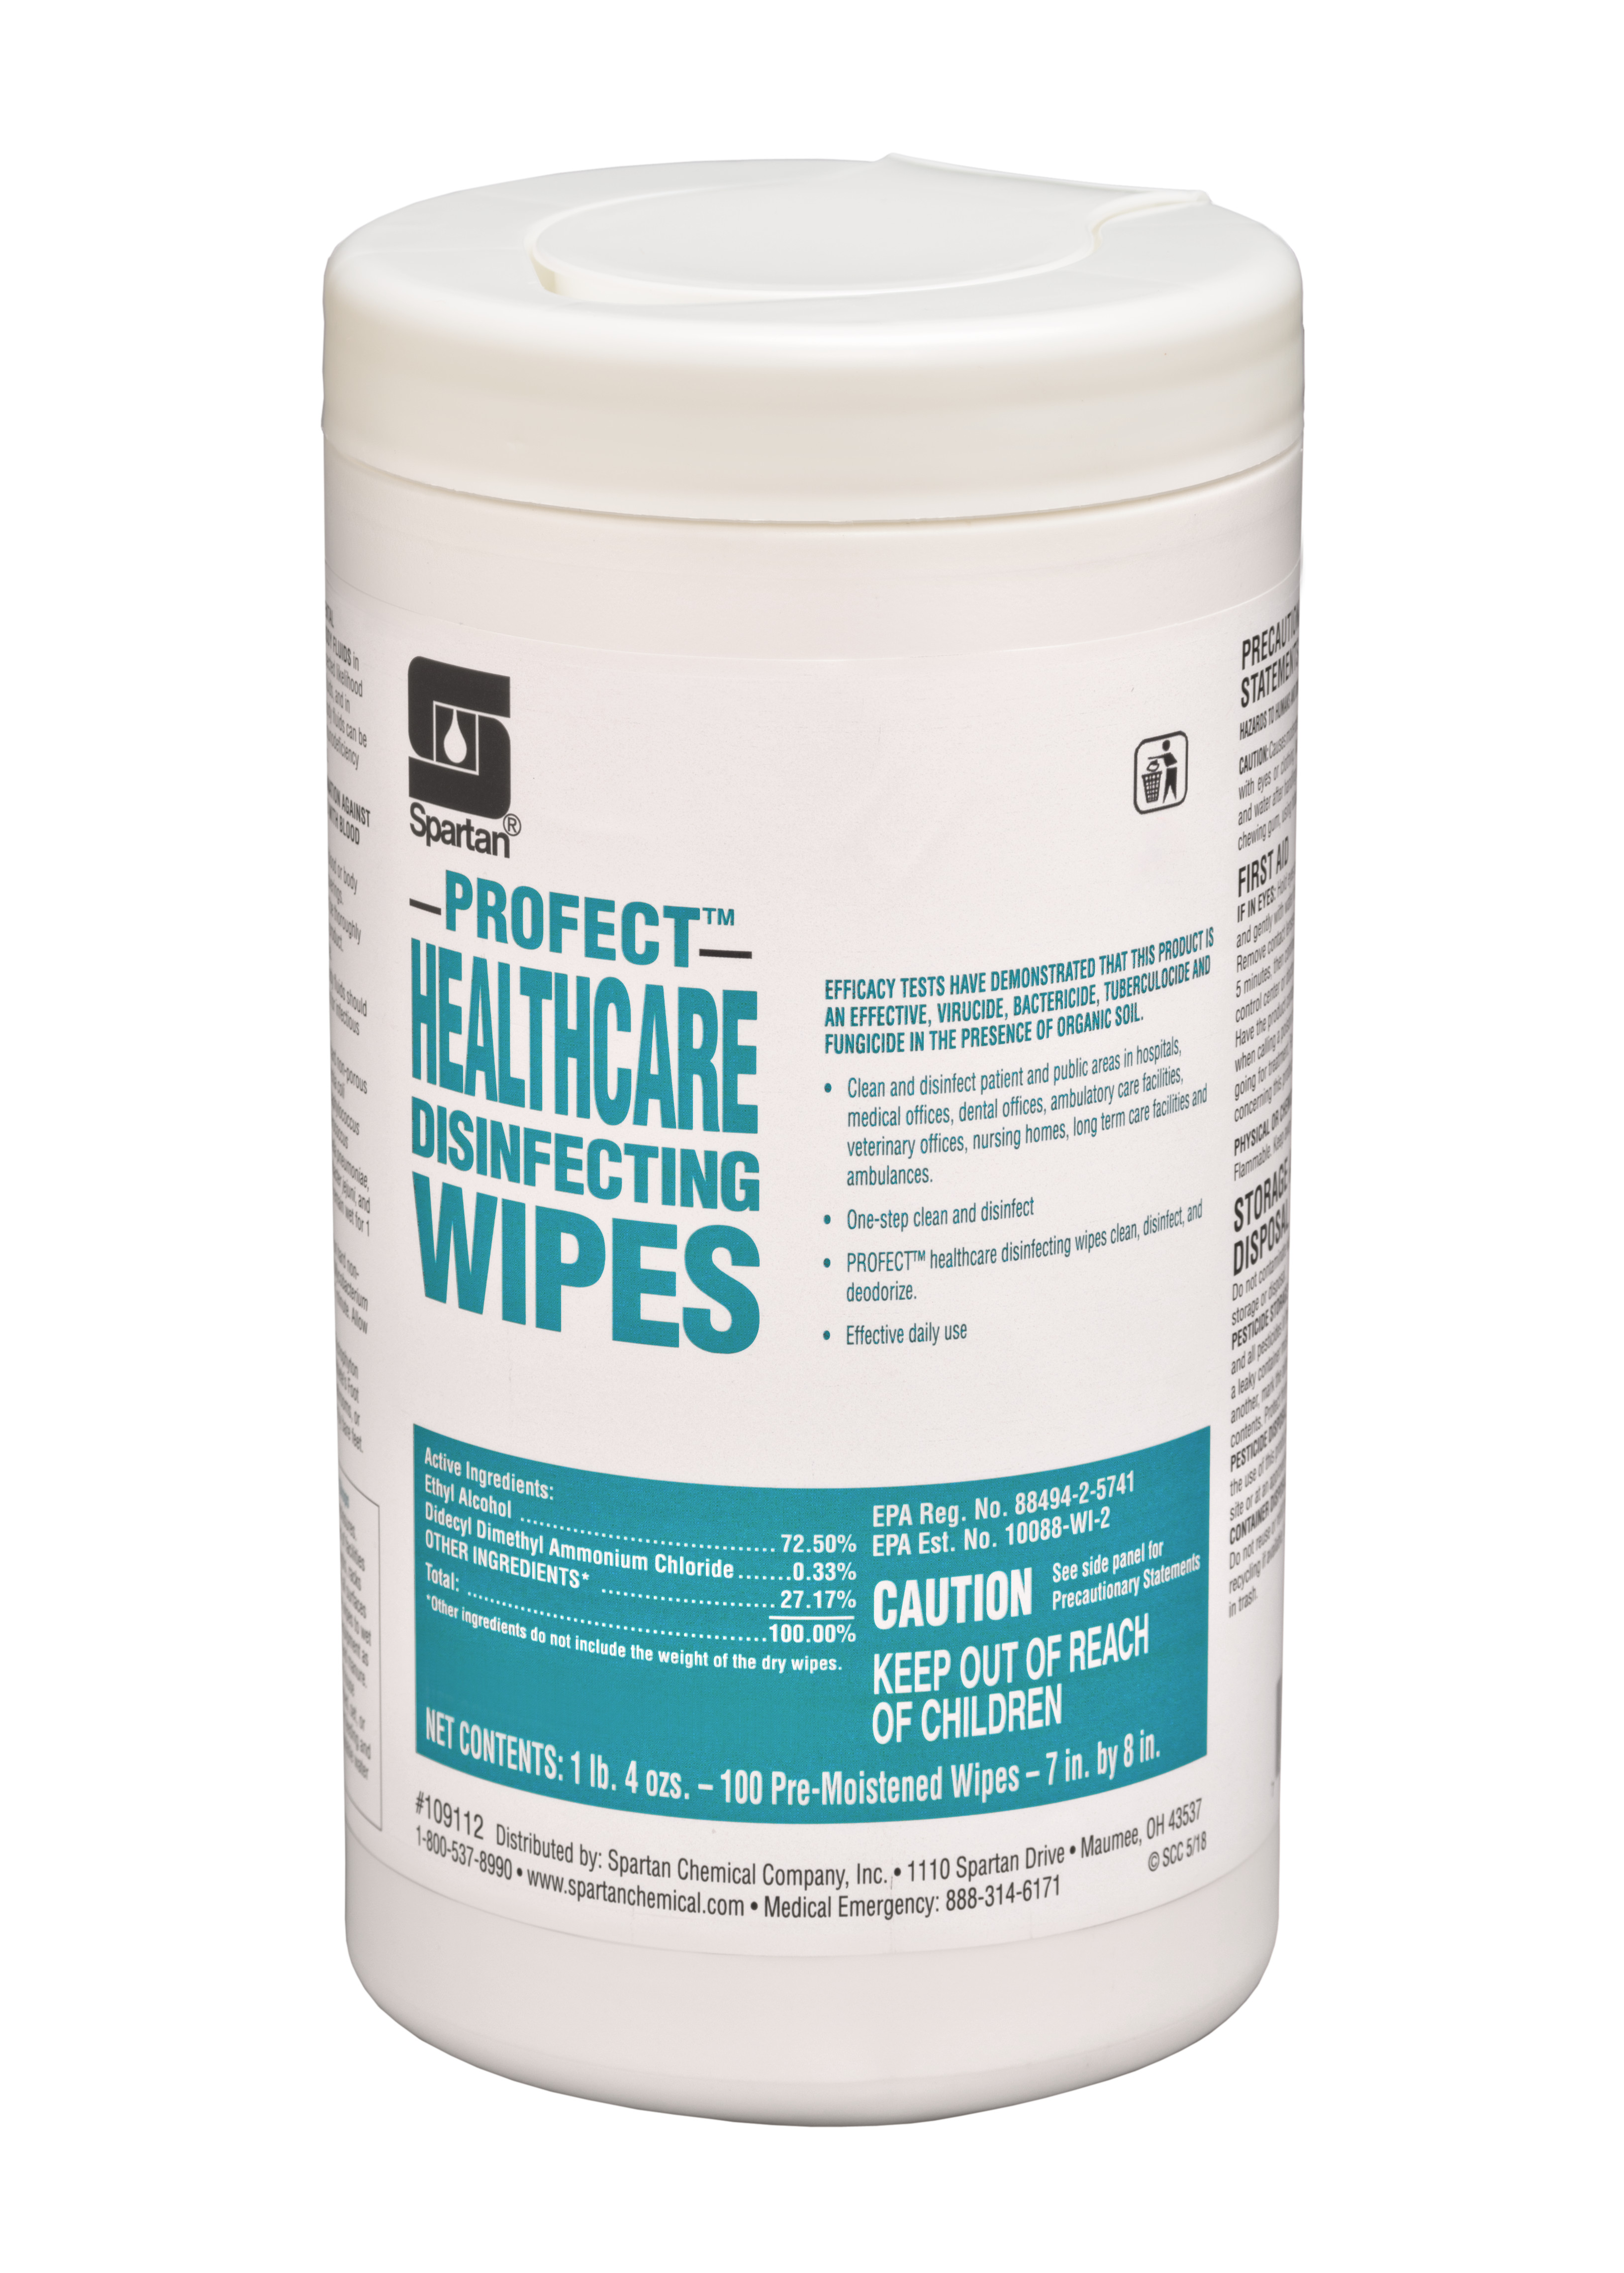 Spartan Chemical Company Profect Healthcare Disinfecting Wipes, 100 Wipes 12/Case